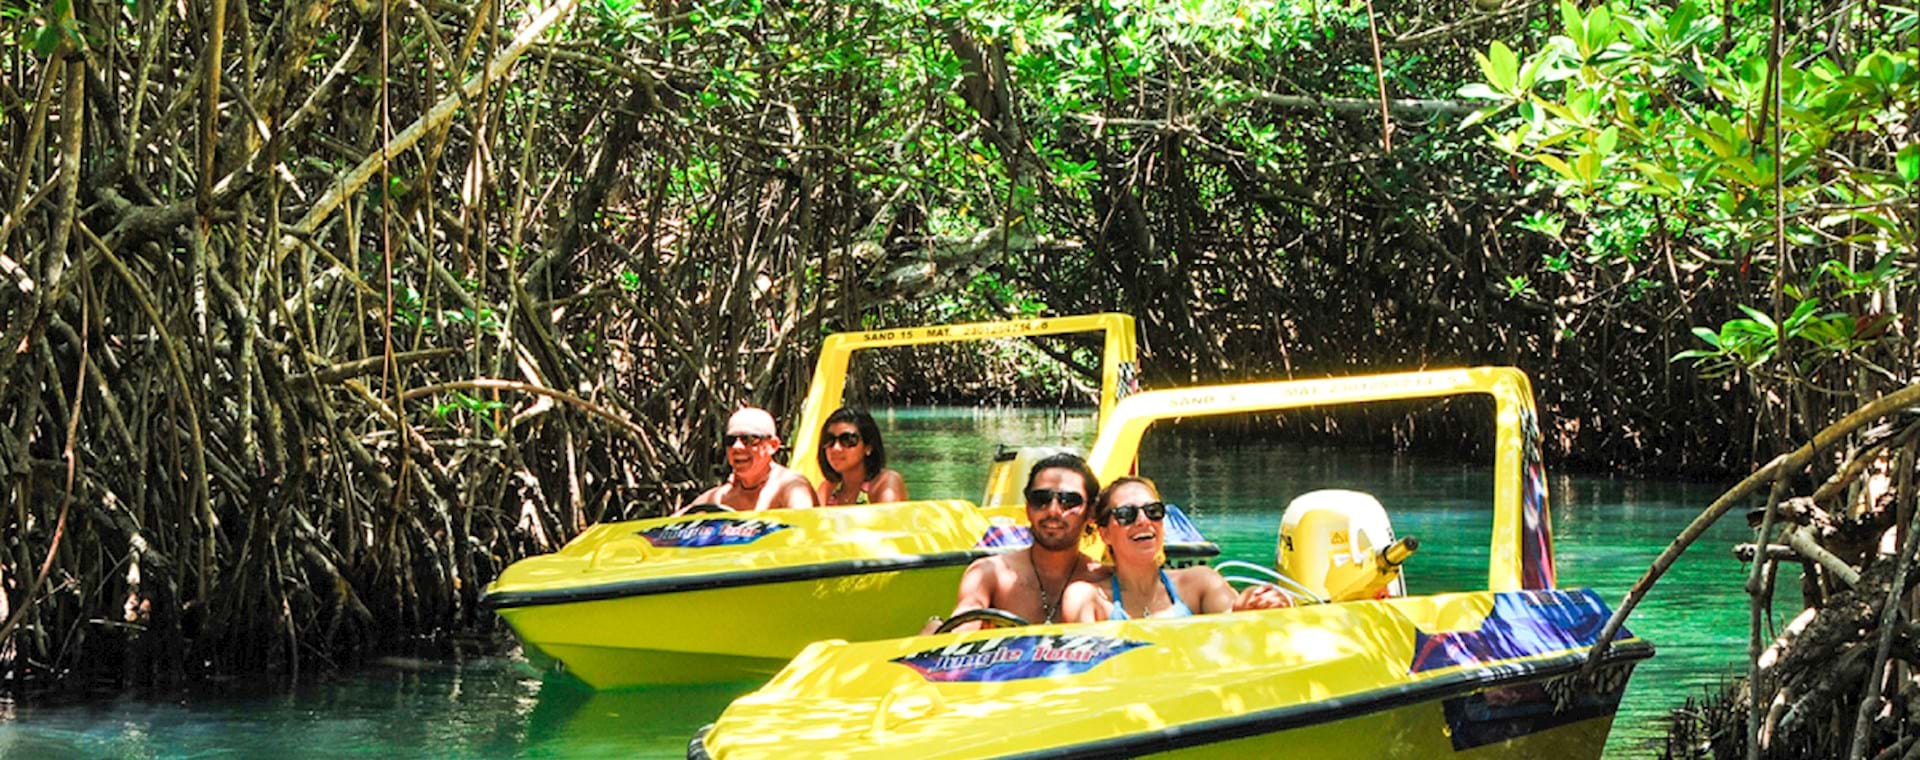 Speedboat tour in the jungle